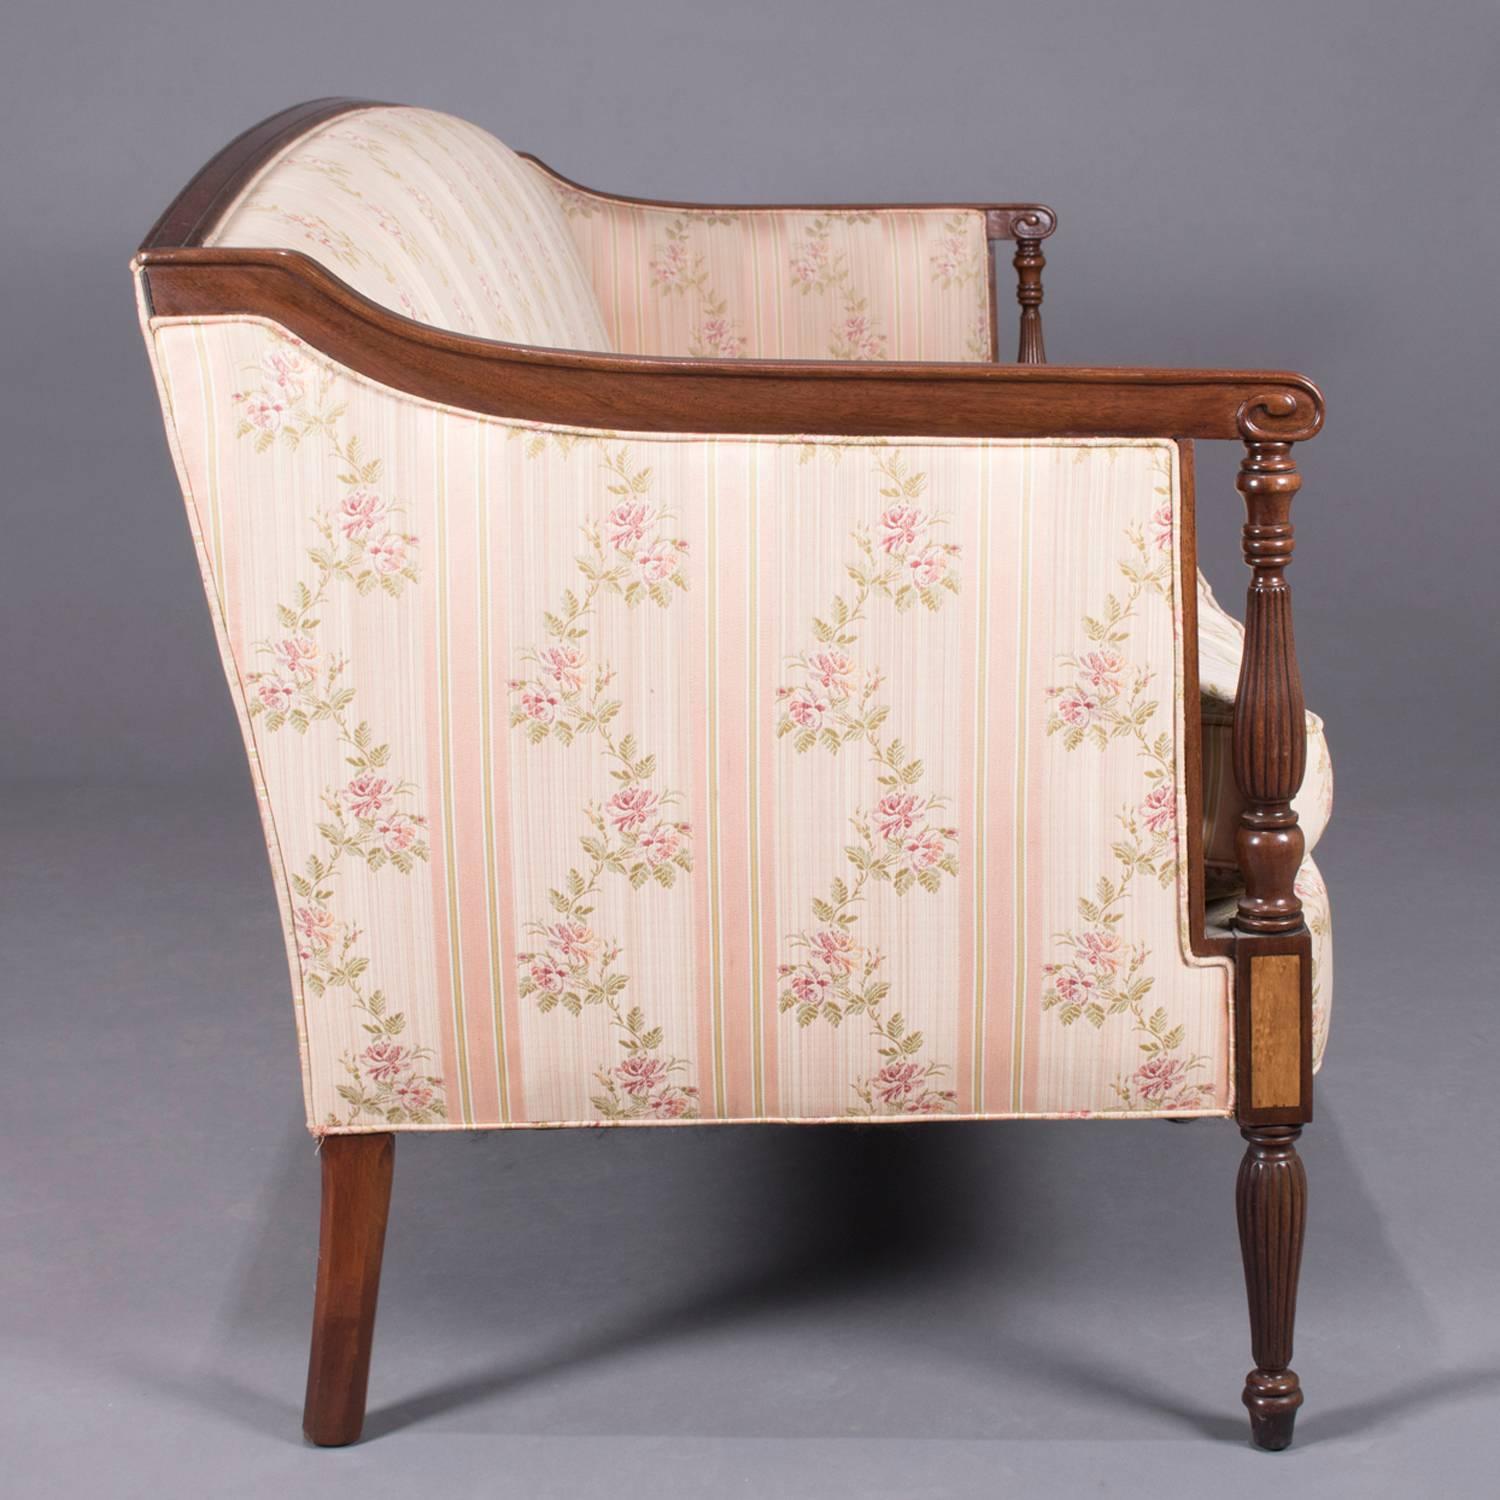 Sheraton School camelback settee by W. & J. Sloan features mahogany frame with carved scroll arms supported by open reeded columns above burl inlay joints and raised on tapered and reeded legs, upholstered and with down filled cushion, maker label